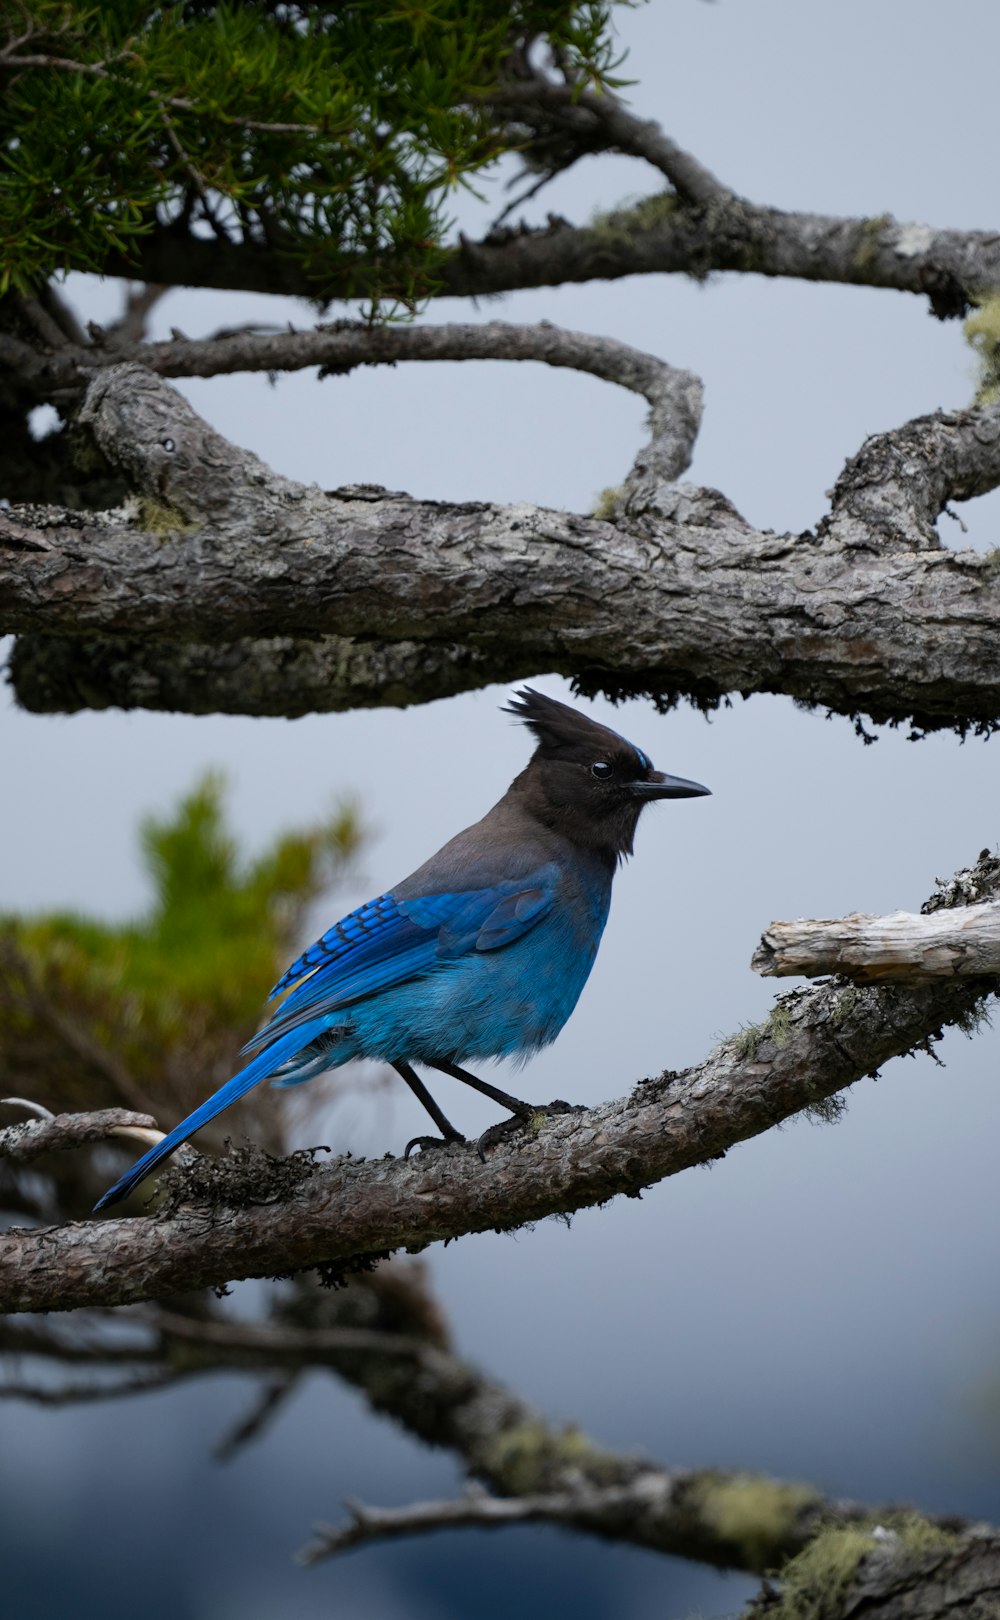 a blue bird perched on a tree branch